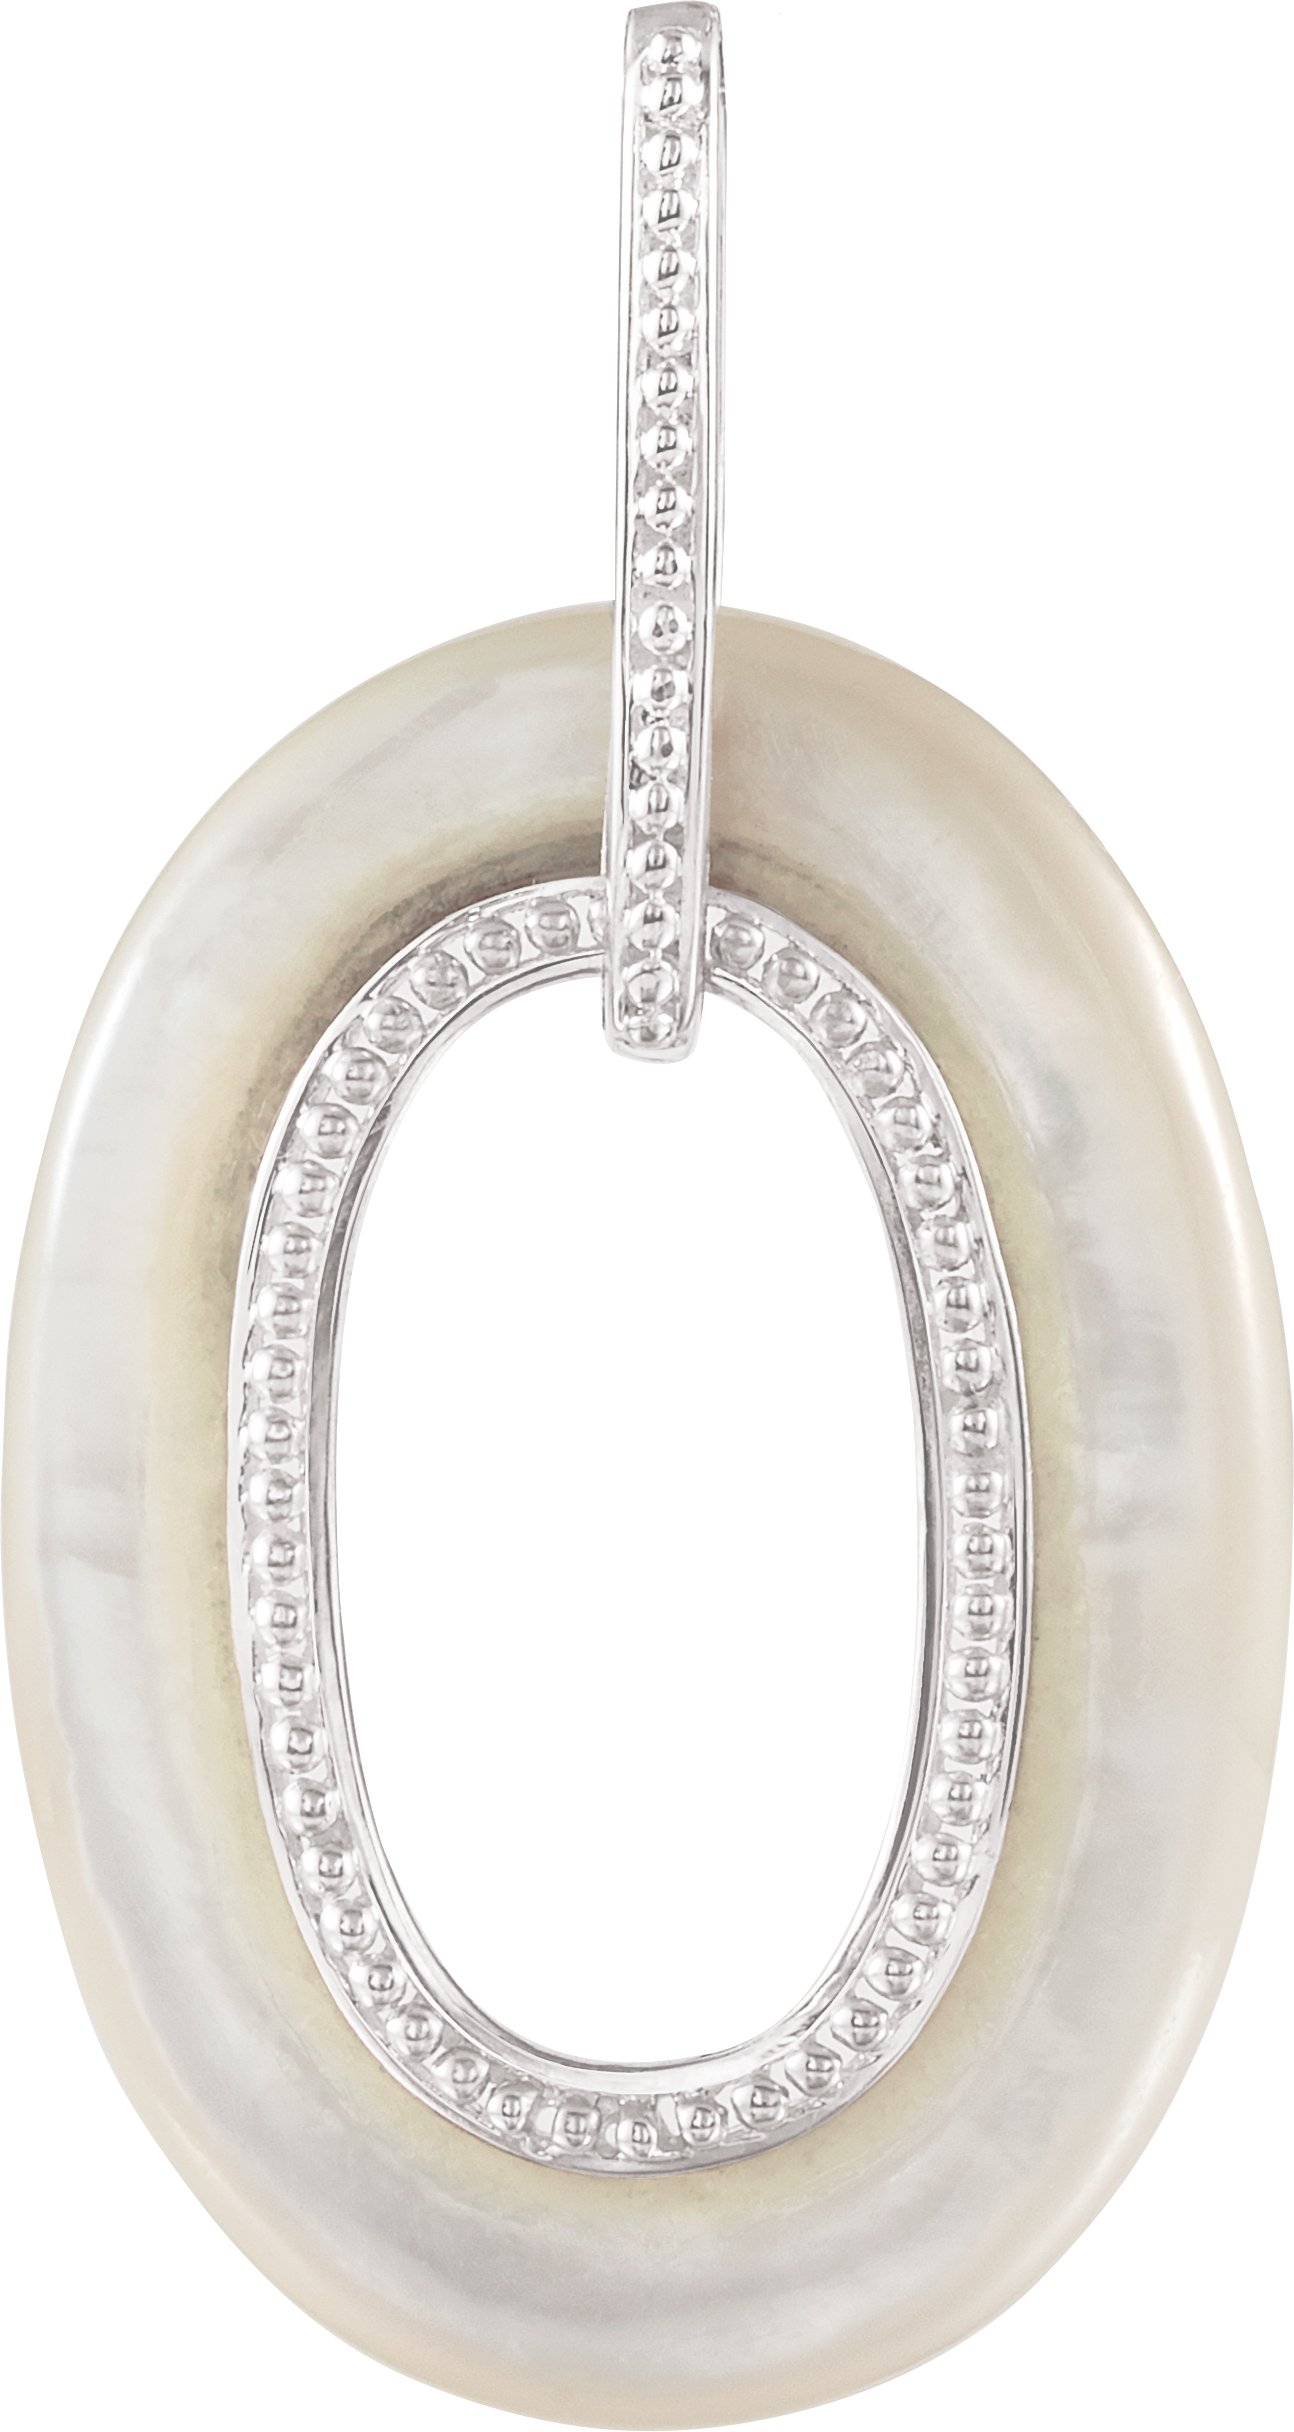 Sterling Silver Mother of Pearl Pendant Ref 3325649